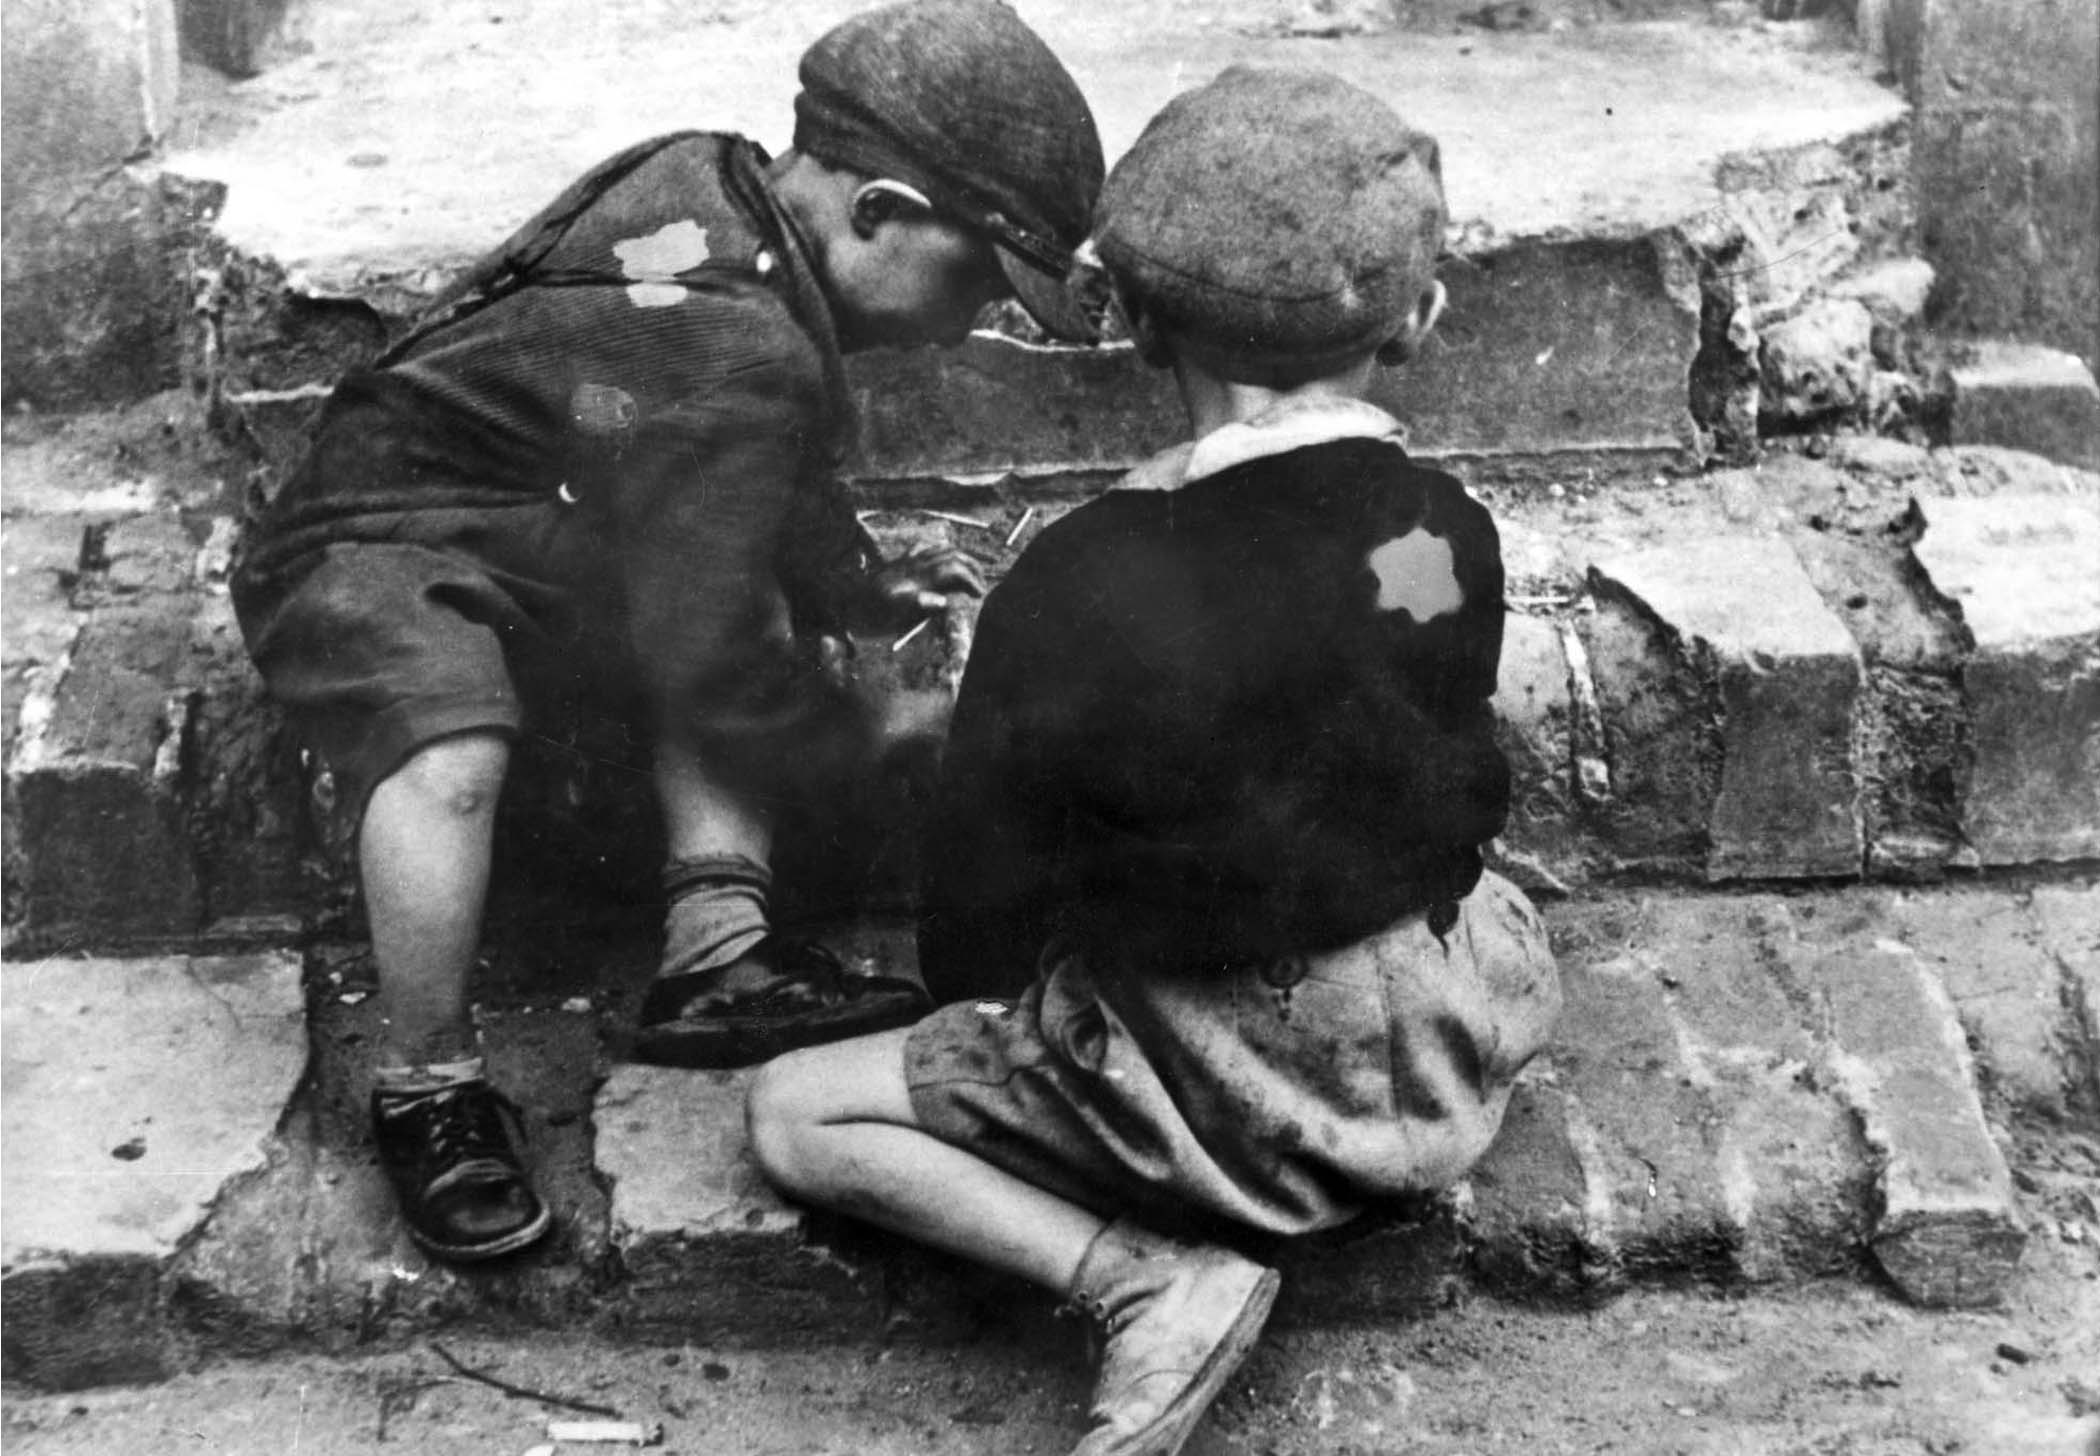 Children Playing in the Lodz Ghetto, 1940